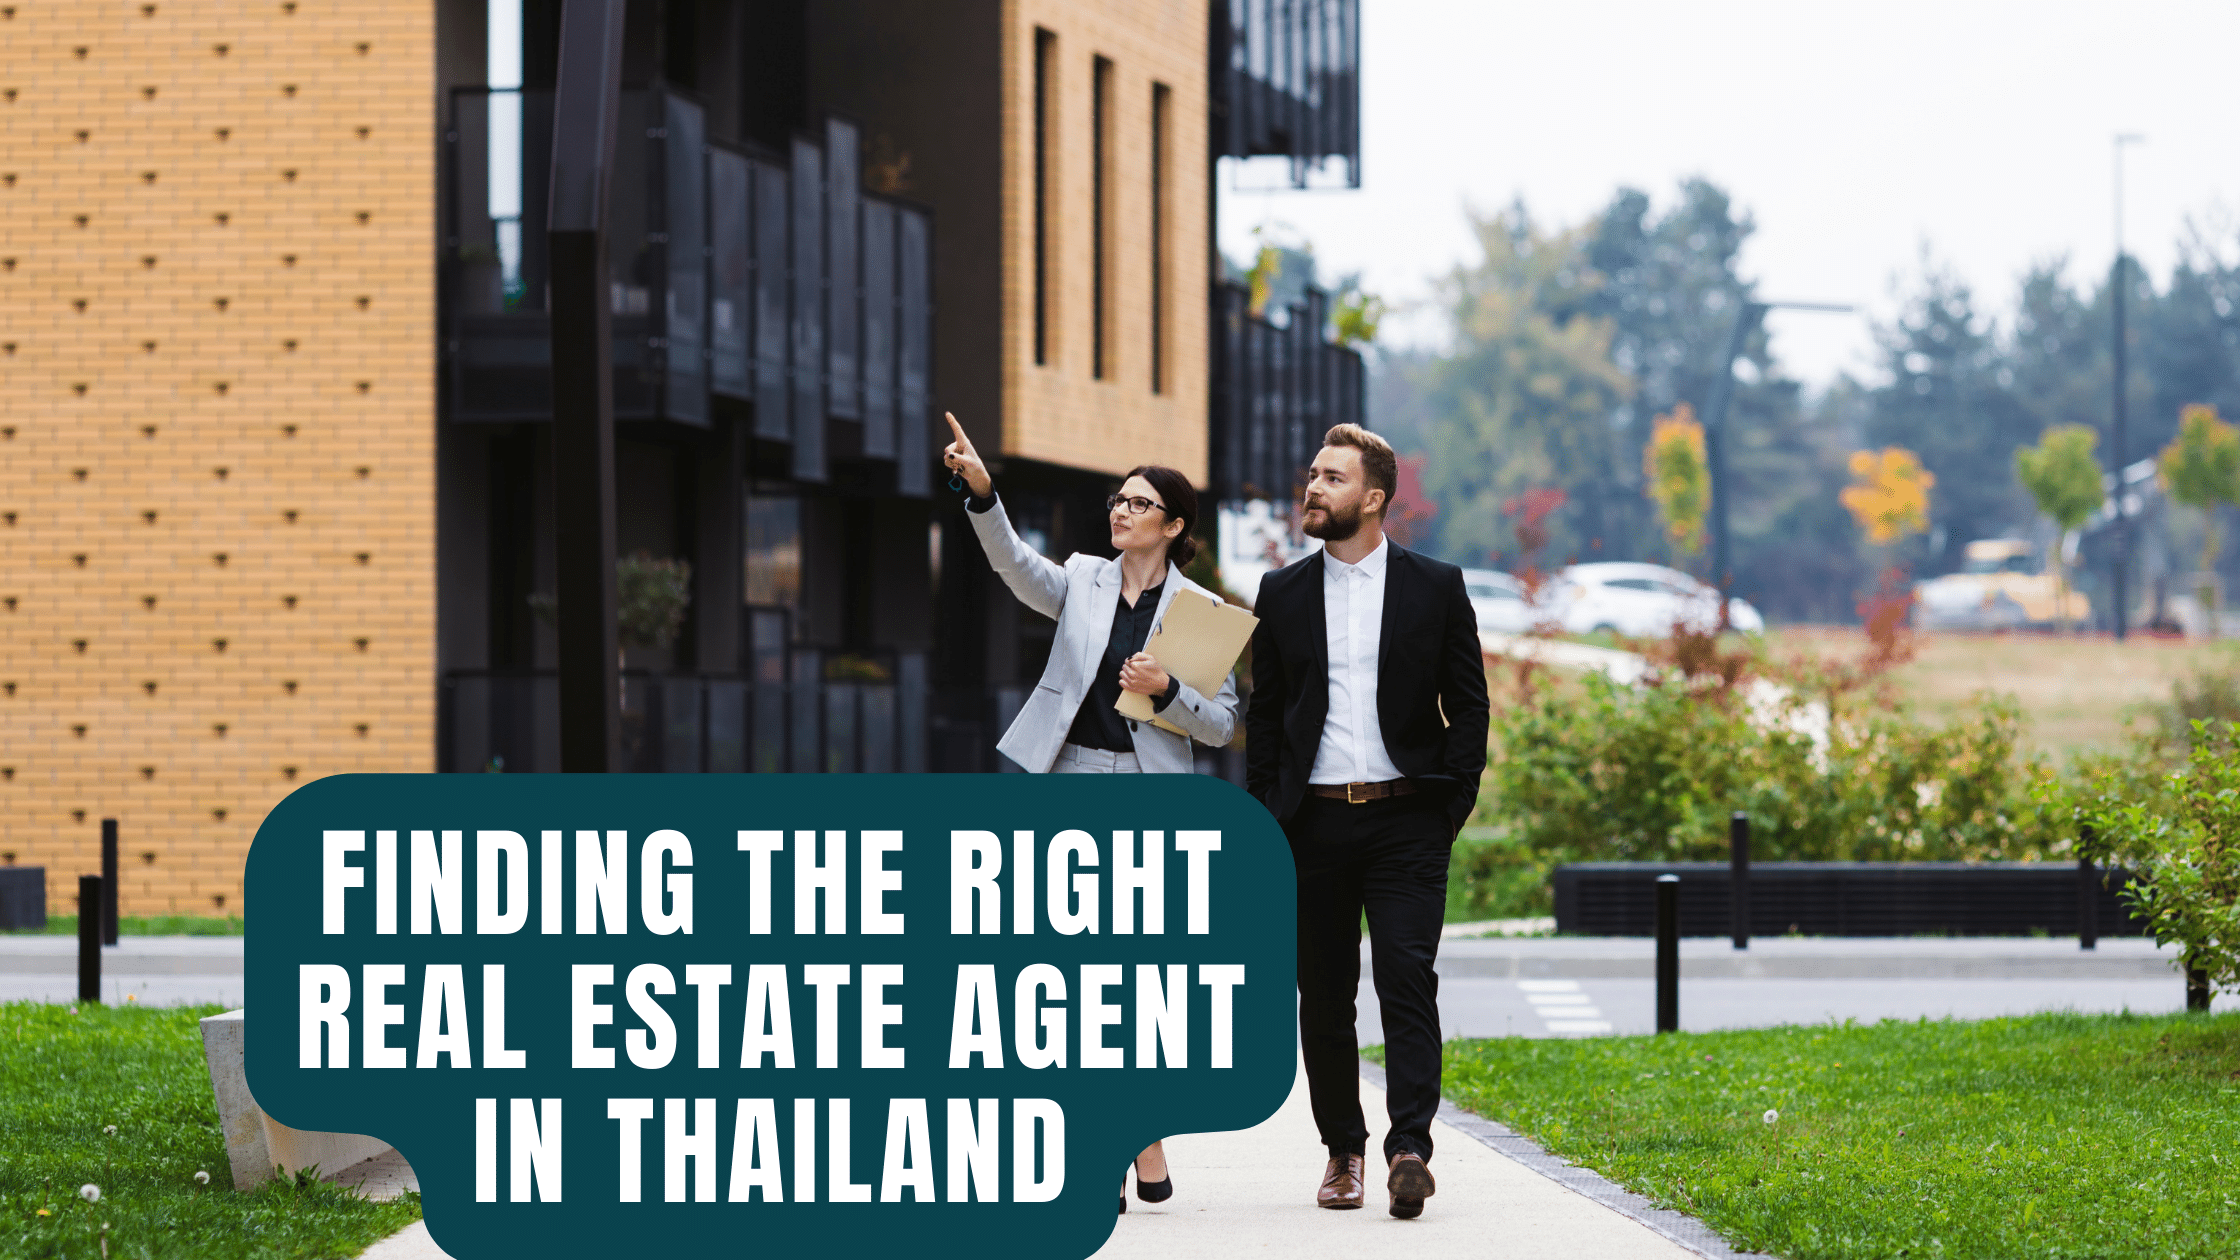 Finding the right real estate agent in Thailand